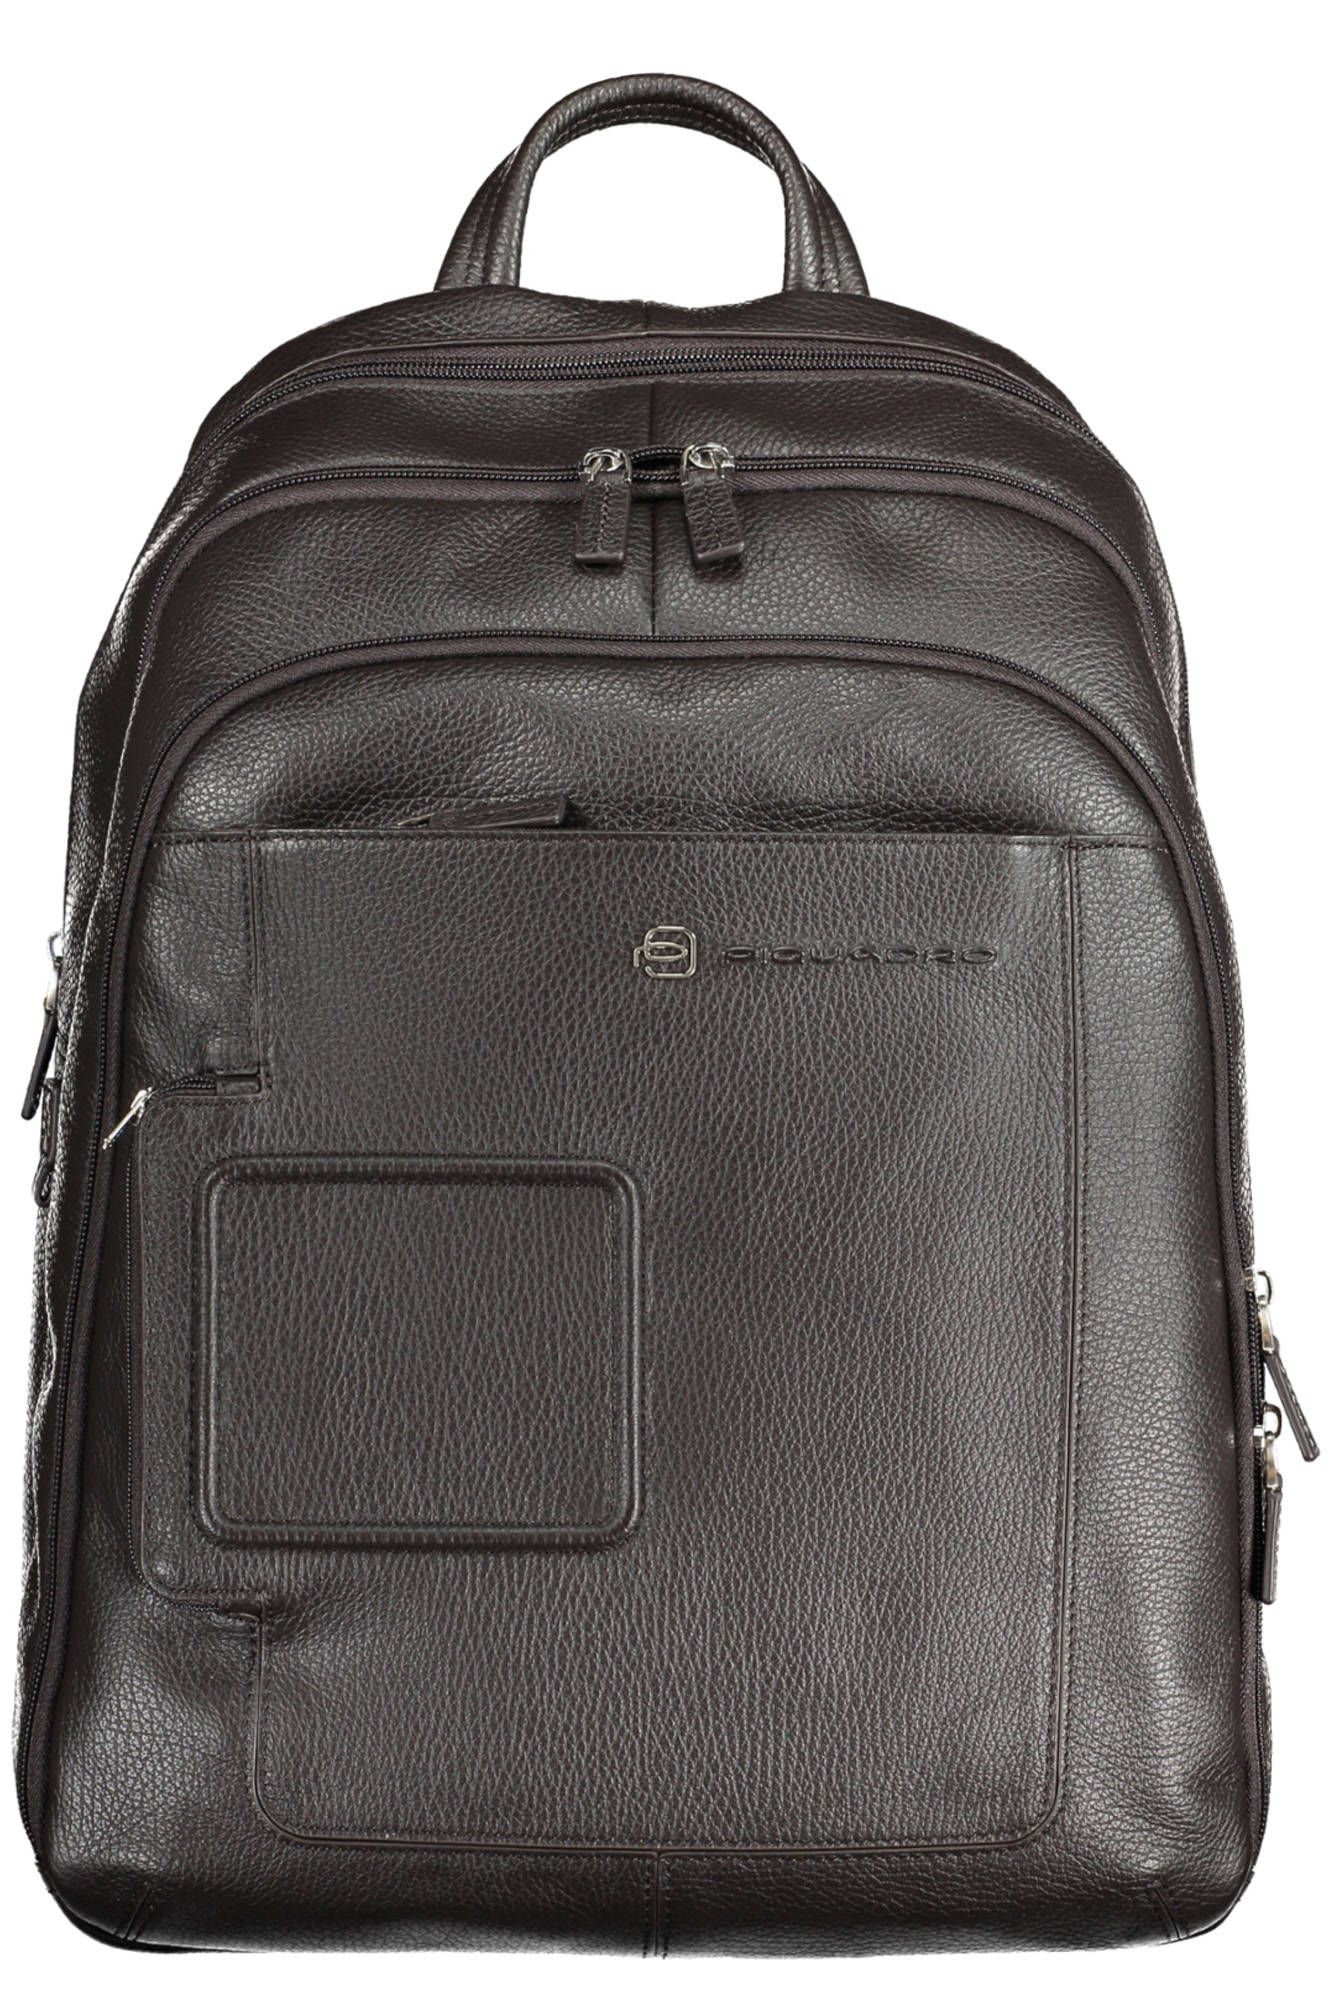 Brown Piquadro Elegant Leather Backpack with Laptop Compartment